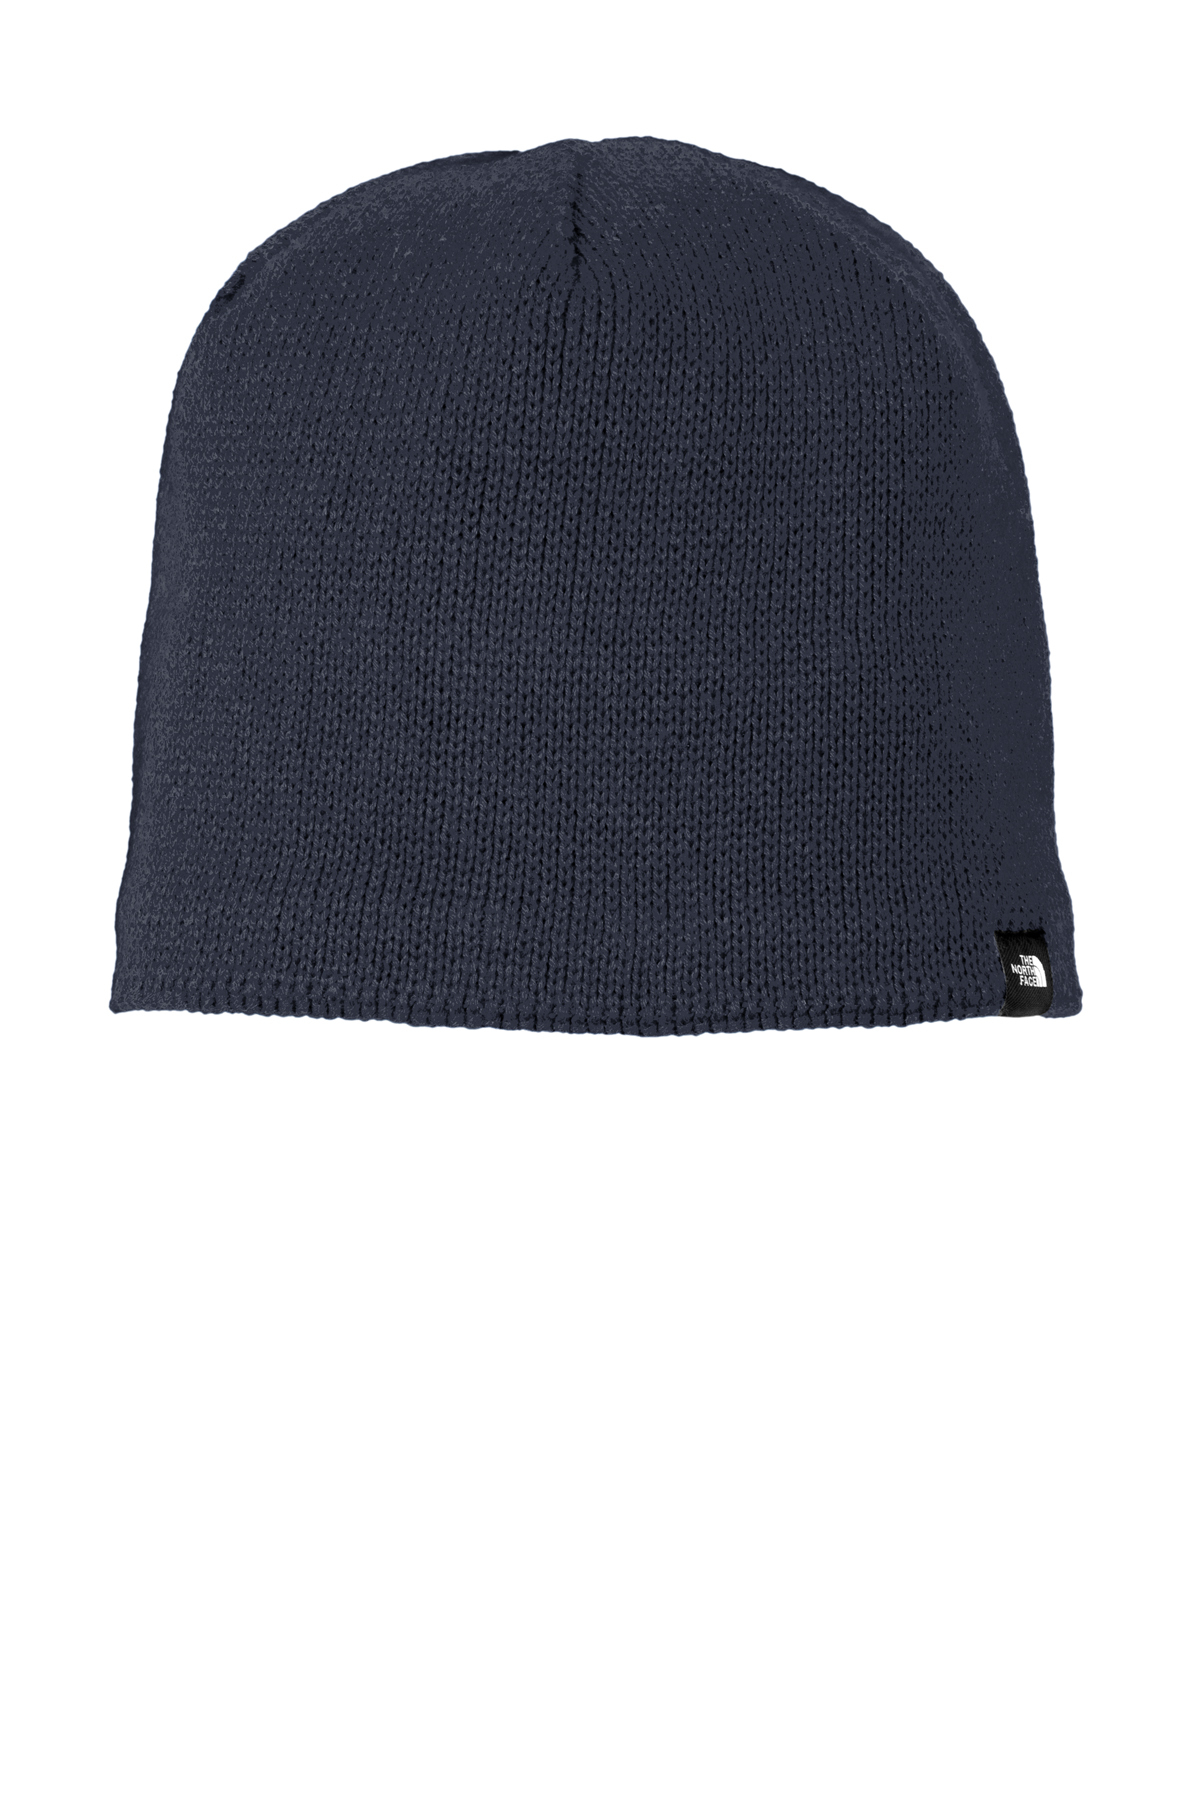 | North Product | The Beanie Face Mountain SanMar